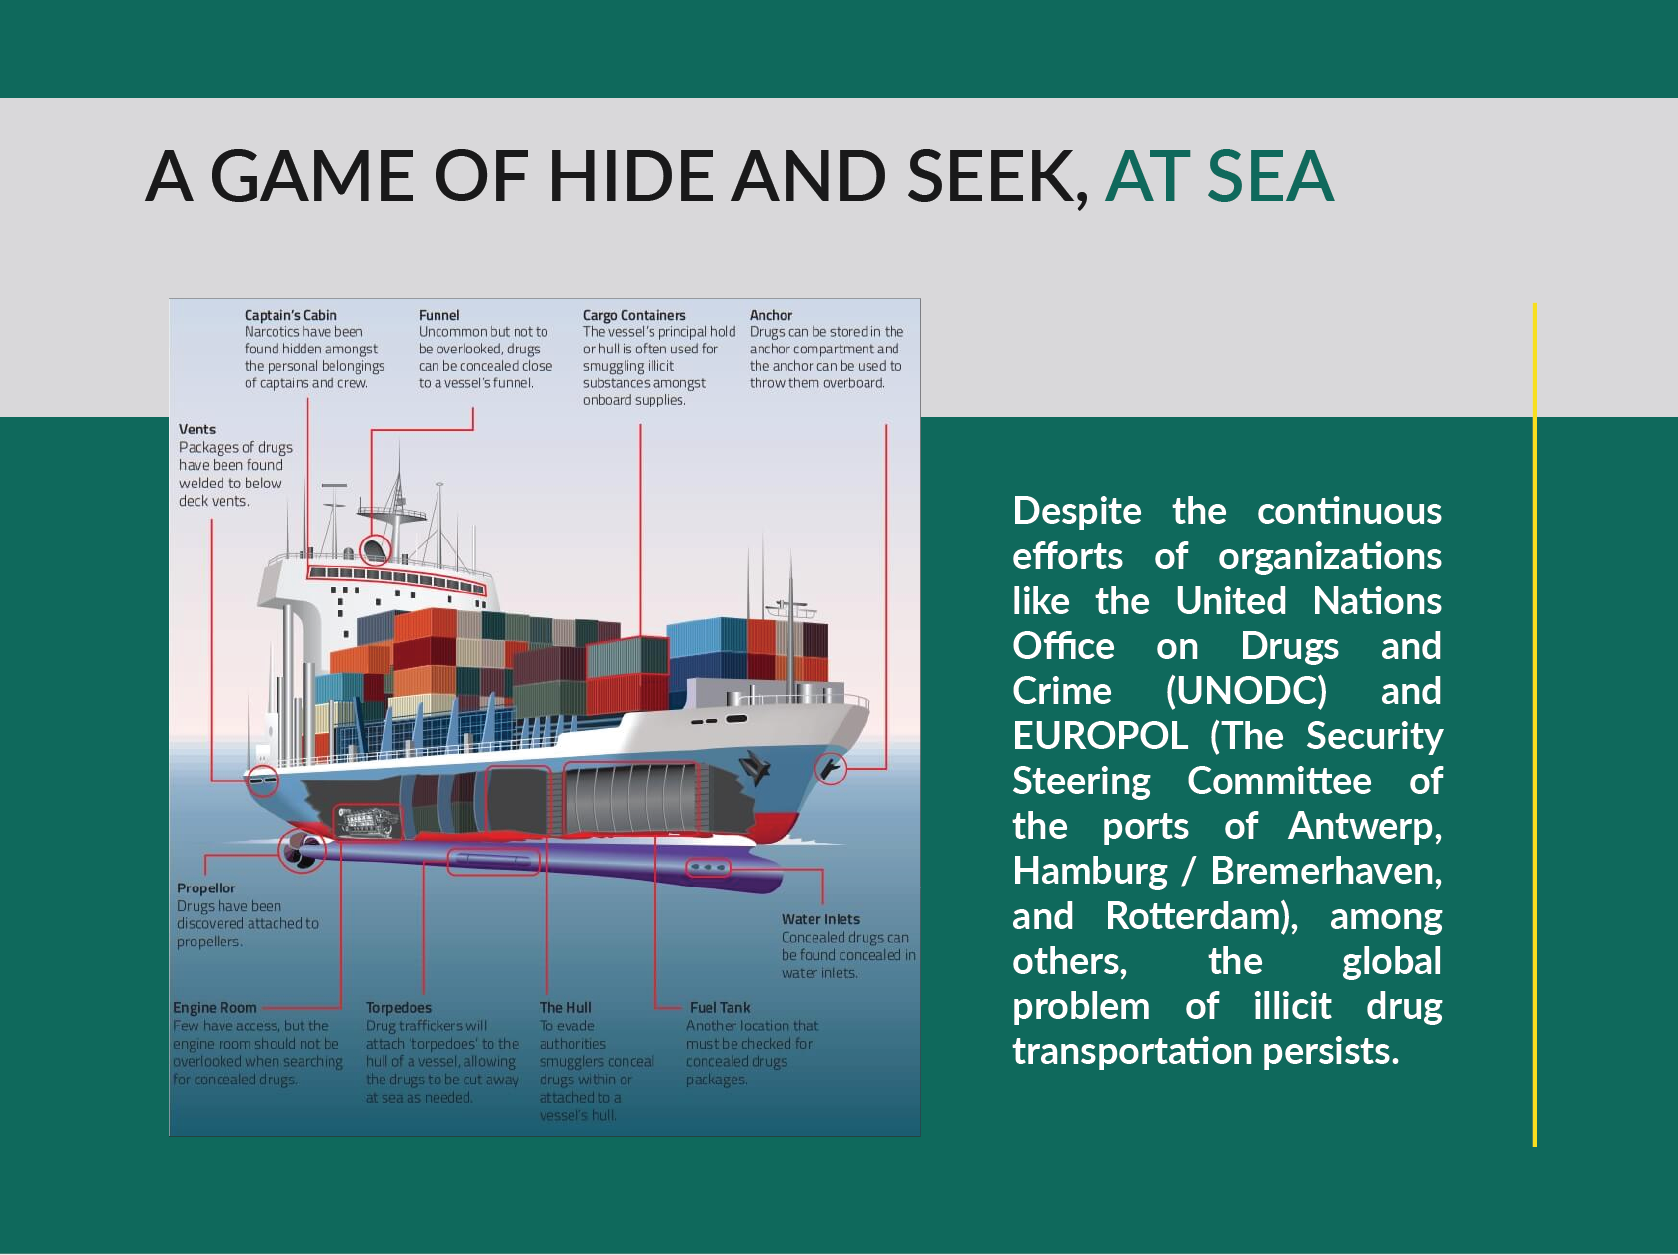 Drug traffickers play a game of hide and seek at Sea